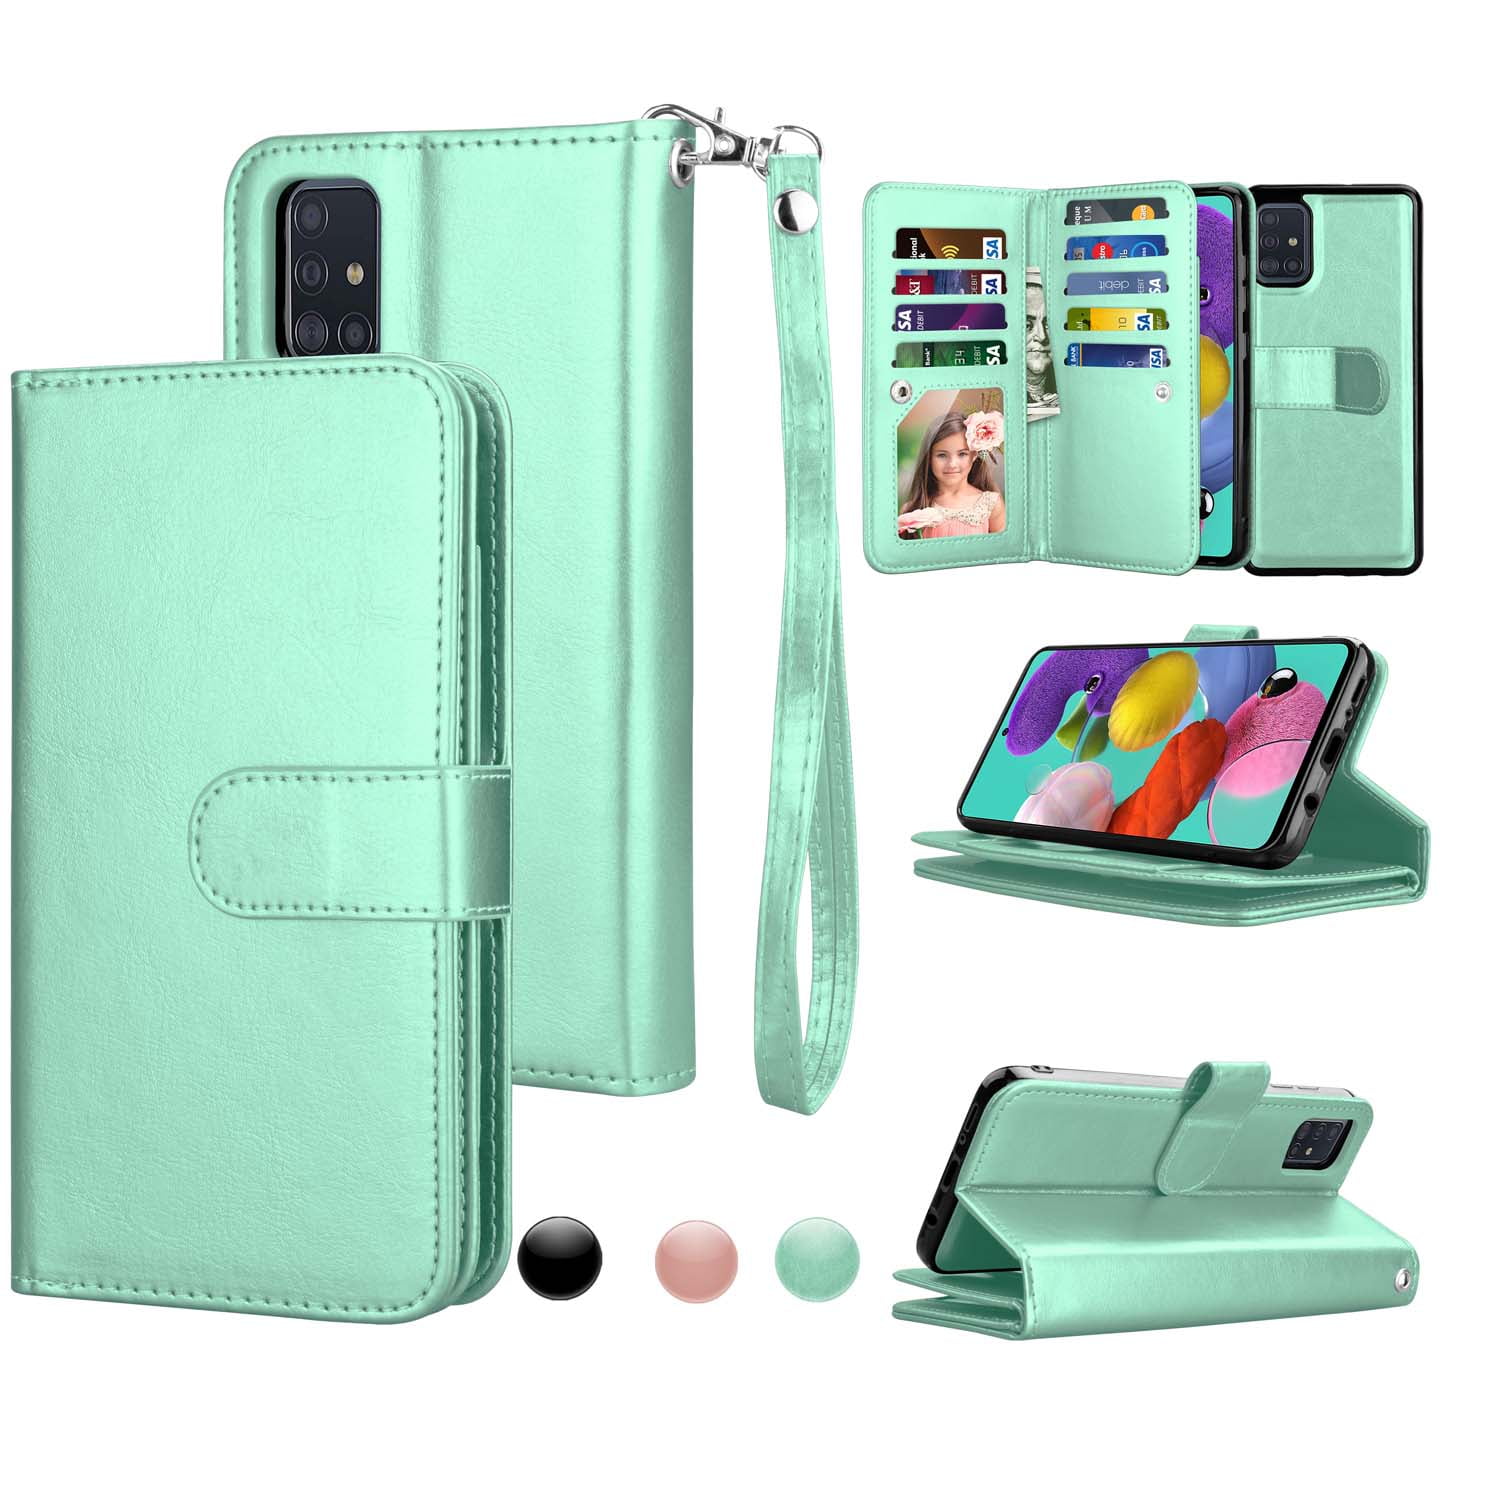 Cover for Samsung Galaxy S10 Plus Leather Extra-Shockproof Business Card Holders Cell Phone case Kickstand with Free Waterproof-Bag Samsung Galaxy S10 Plus Flip Case